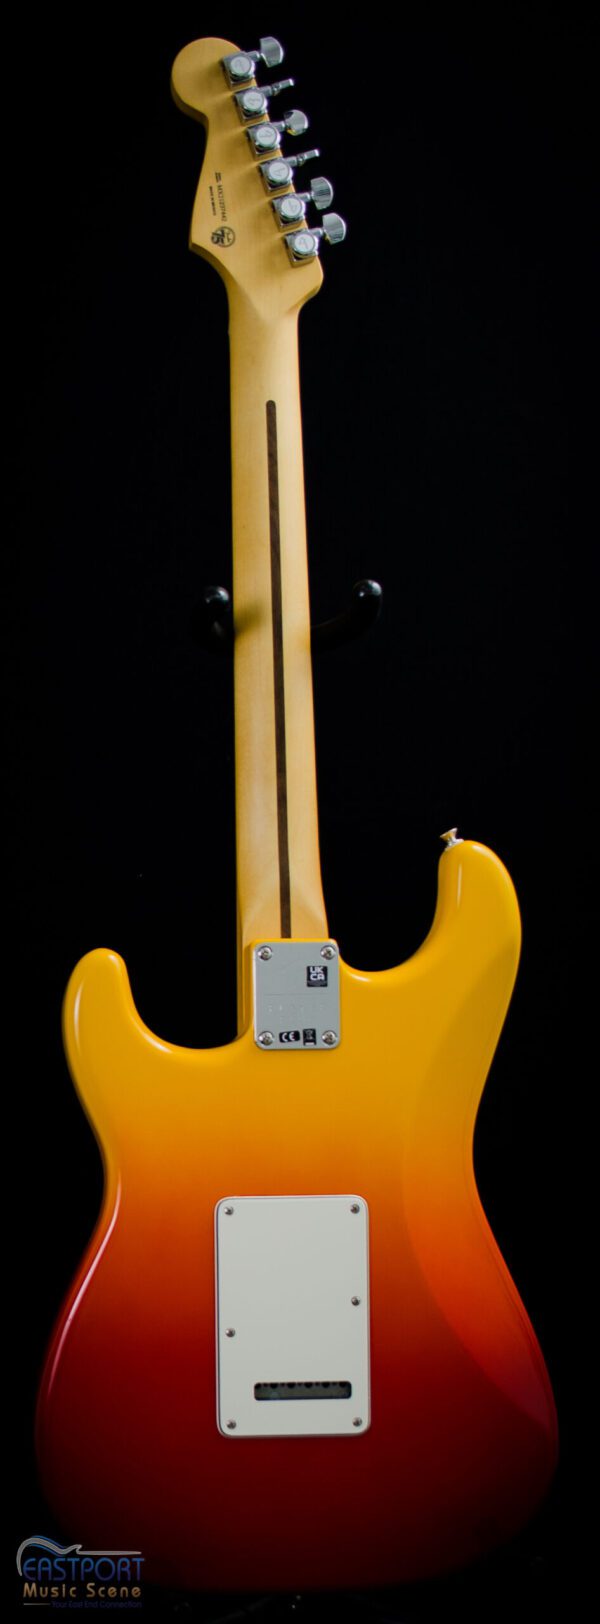 A yellow electric guitar with a black background